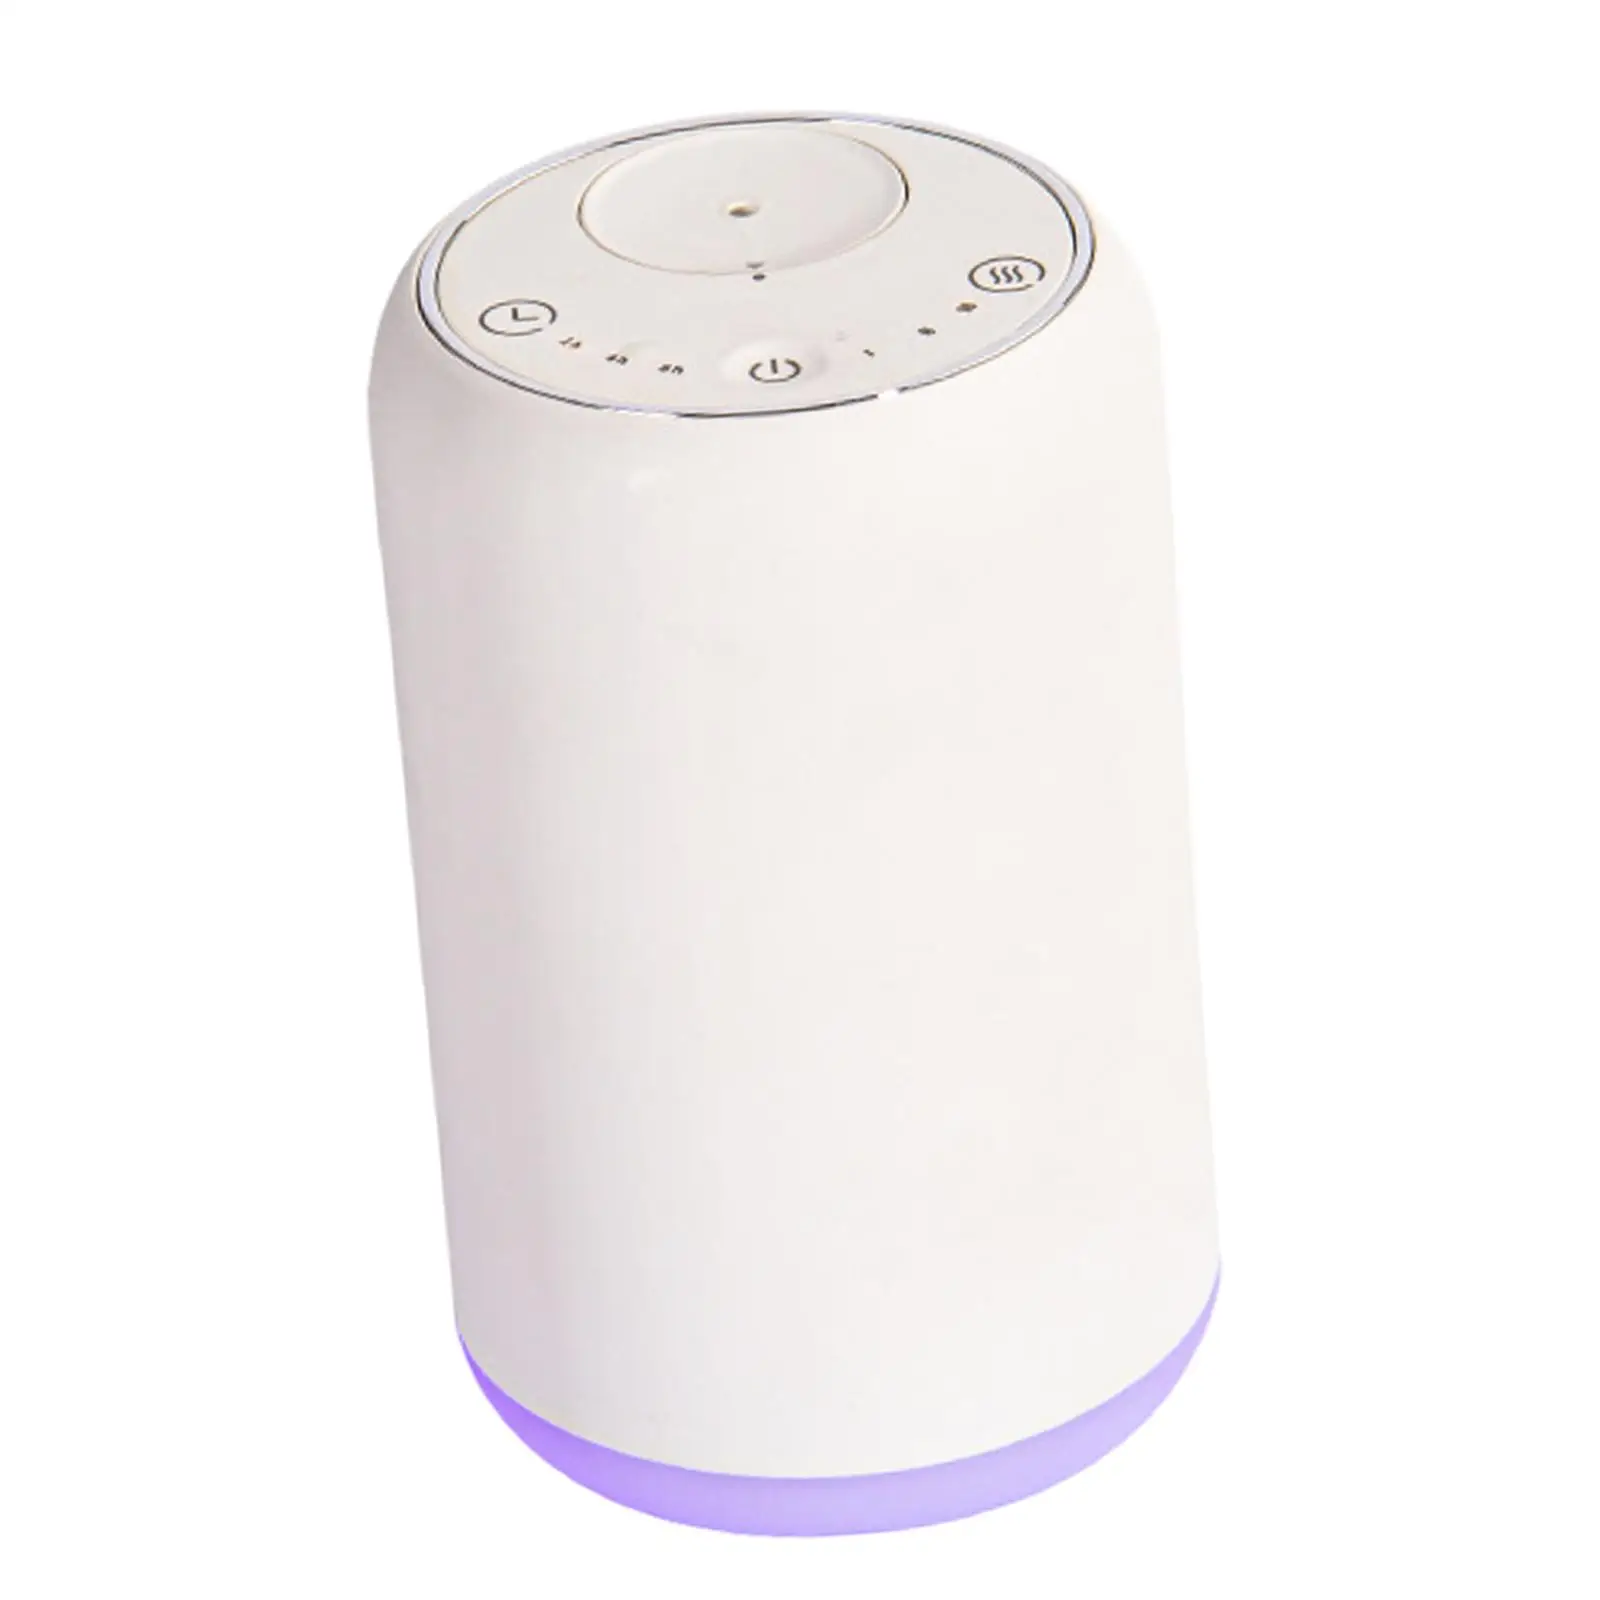 Essential Oil Diffusers Aromatherapy Oil Diffuser for Desktop Bedroom